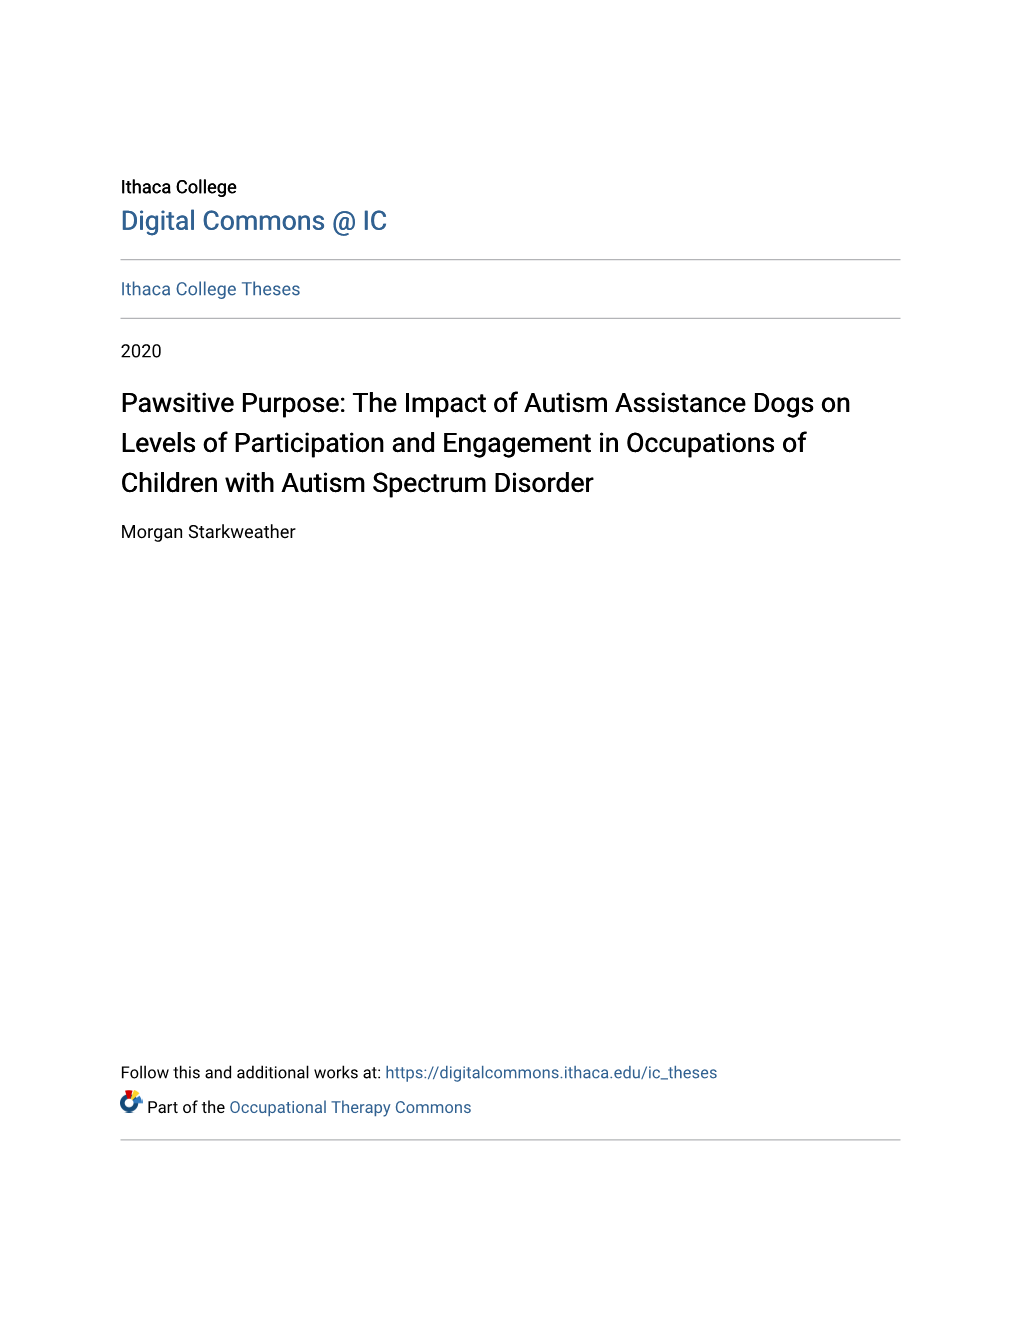 The Impact of Autism Assistance Dogs on Levels of Participation and Engagement in Occupations of Children with Autism Spectrum Disorder